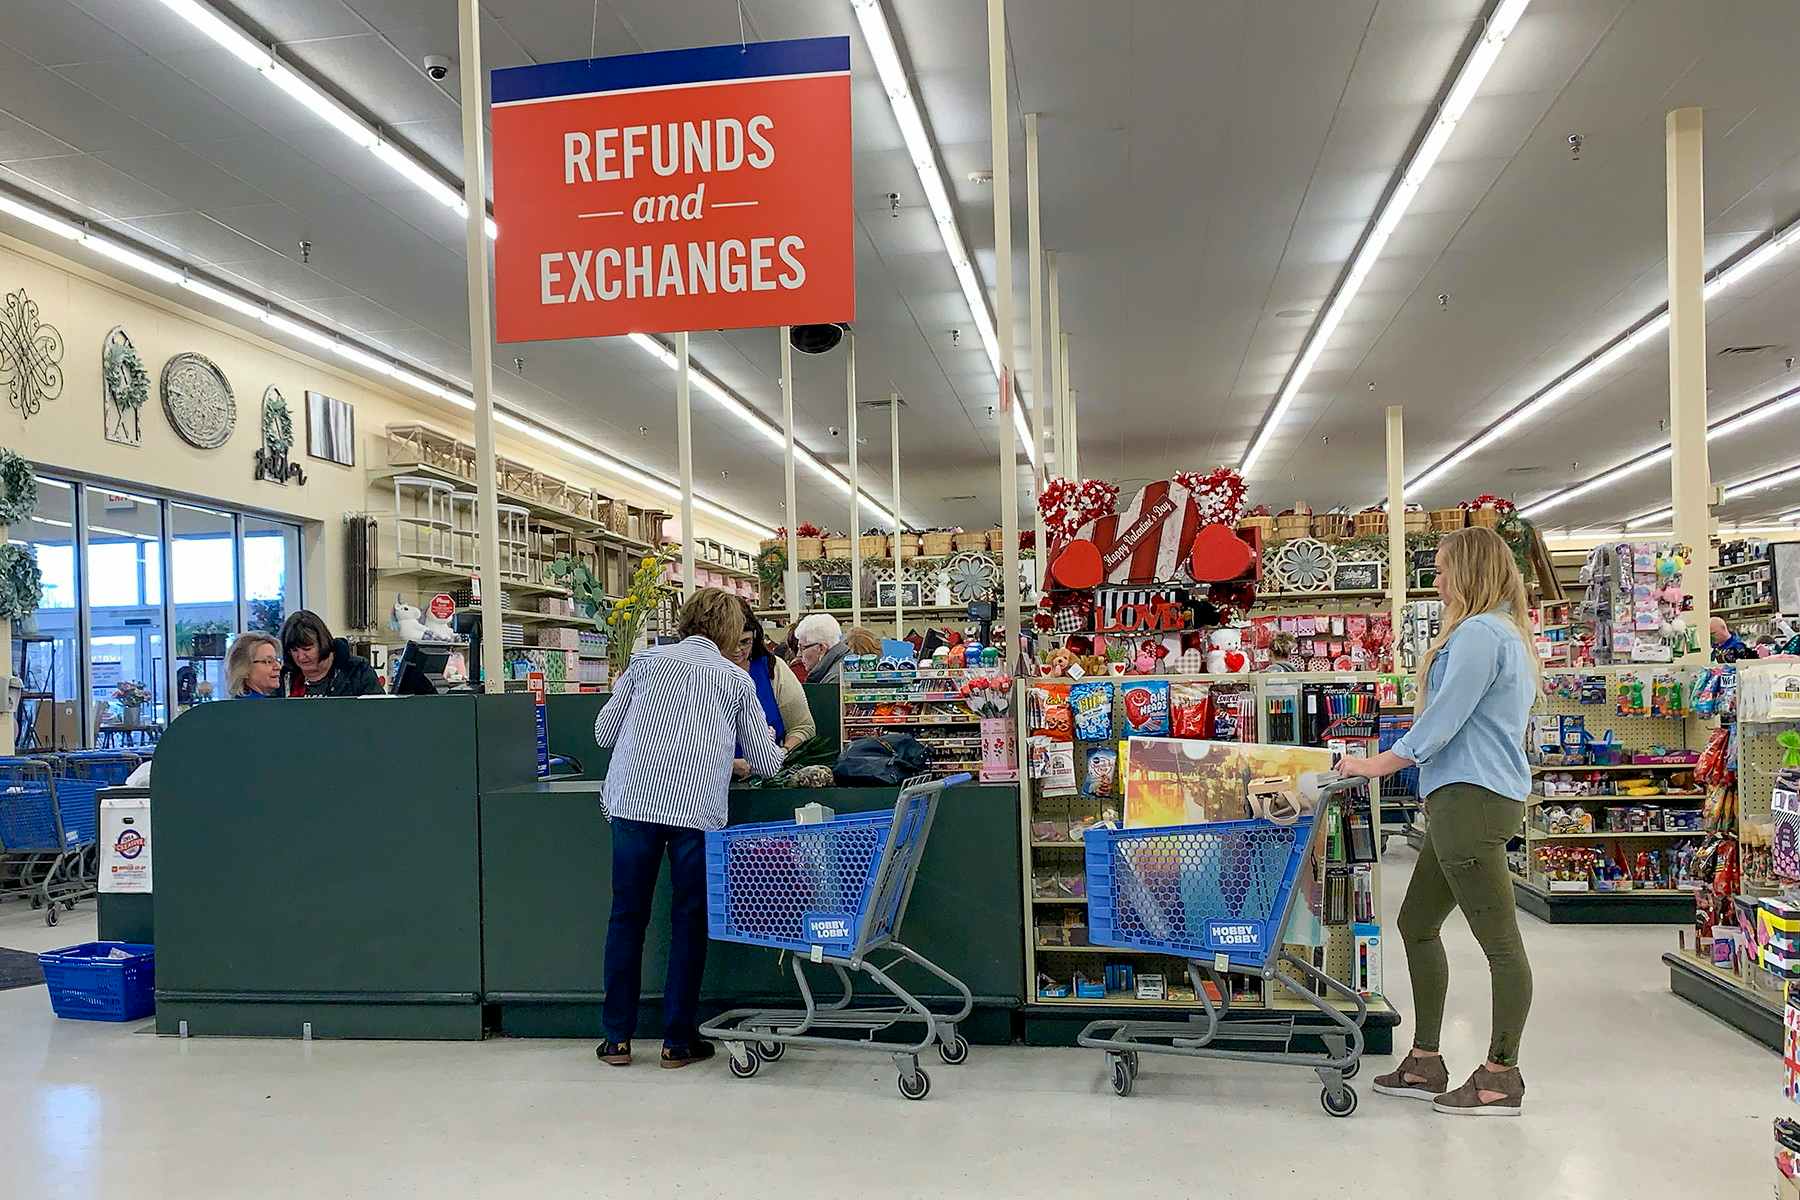 People in line at the Refunds and Exchanges checkout register.